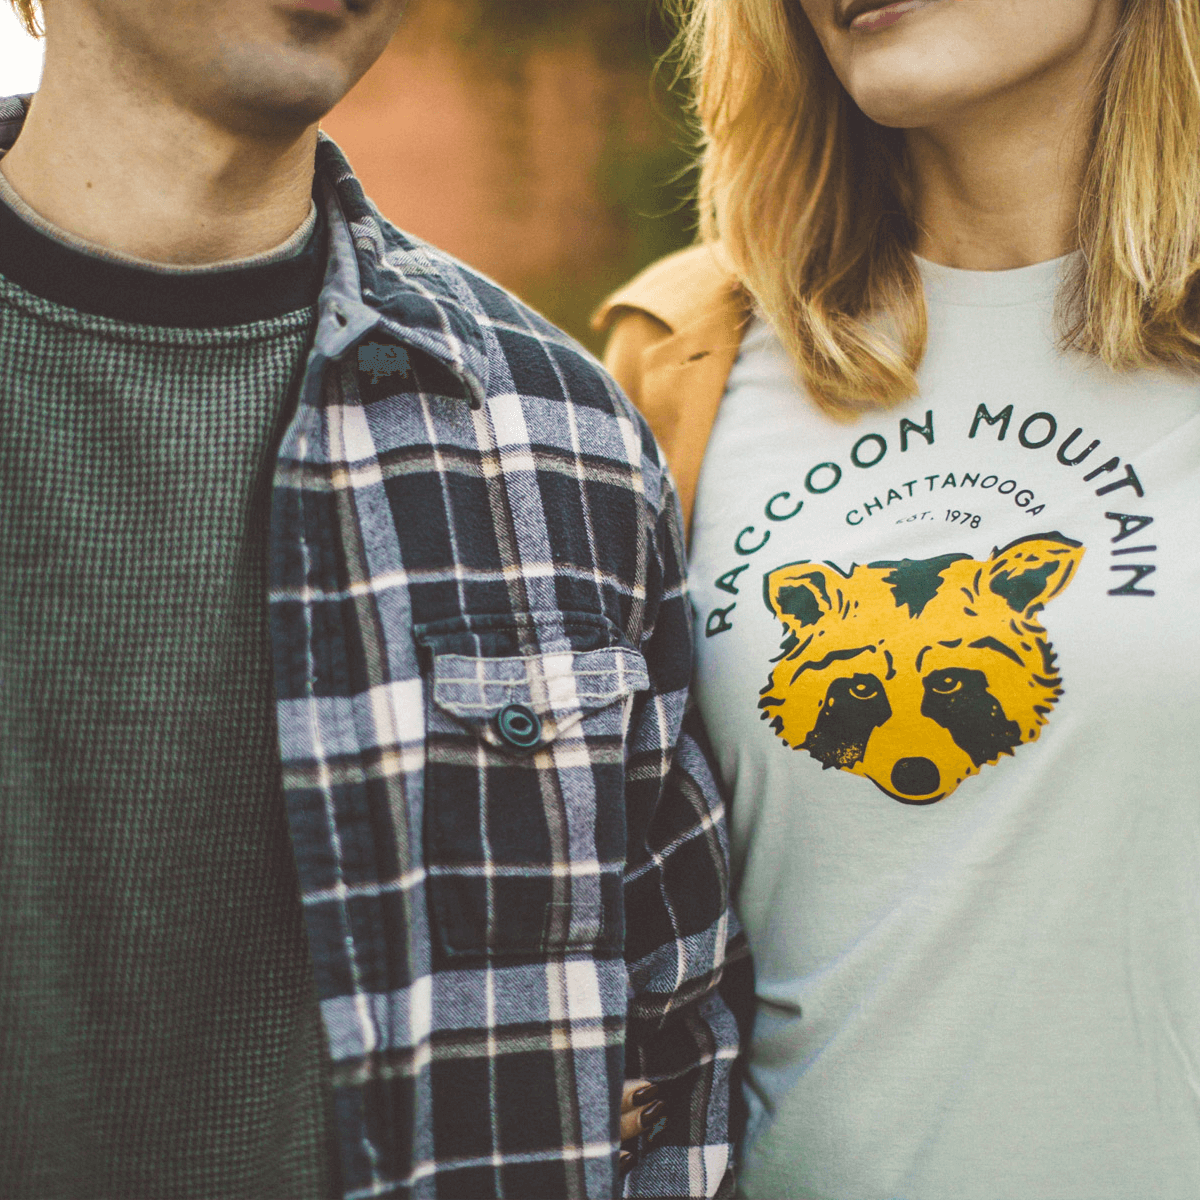 A Bella Canvas heather dust t-shirt featuring our NativeMade Raccoon Mountain Chattanooga design.